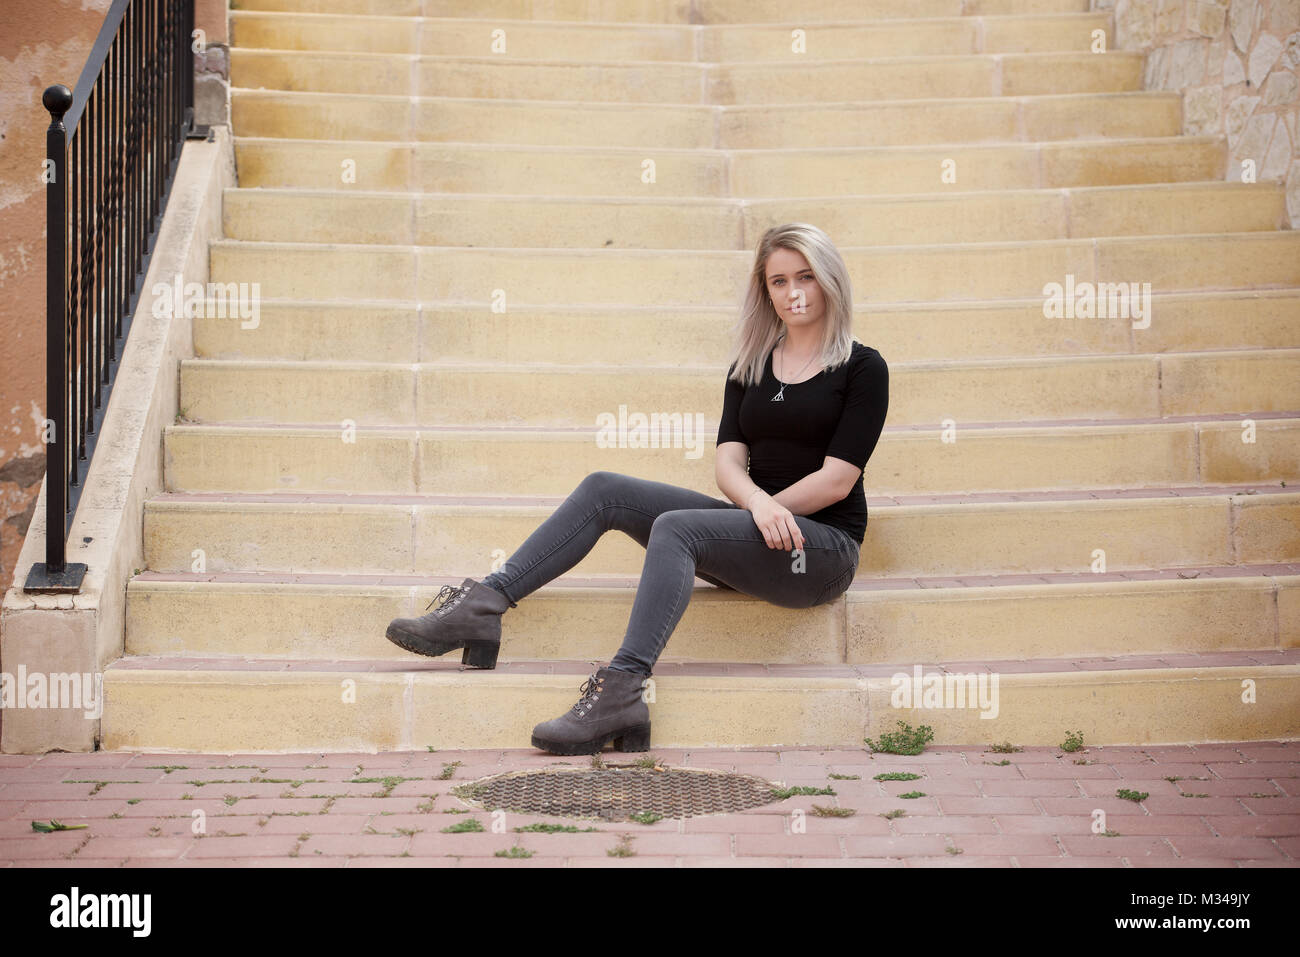 Beautiful blonde girl in jeans and t-shirt sitting on steps Stock Photo